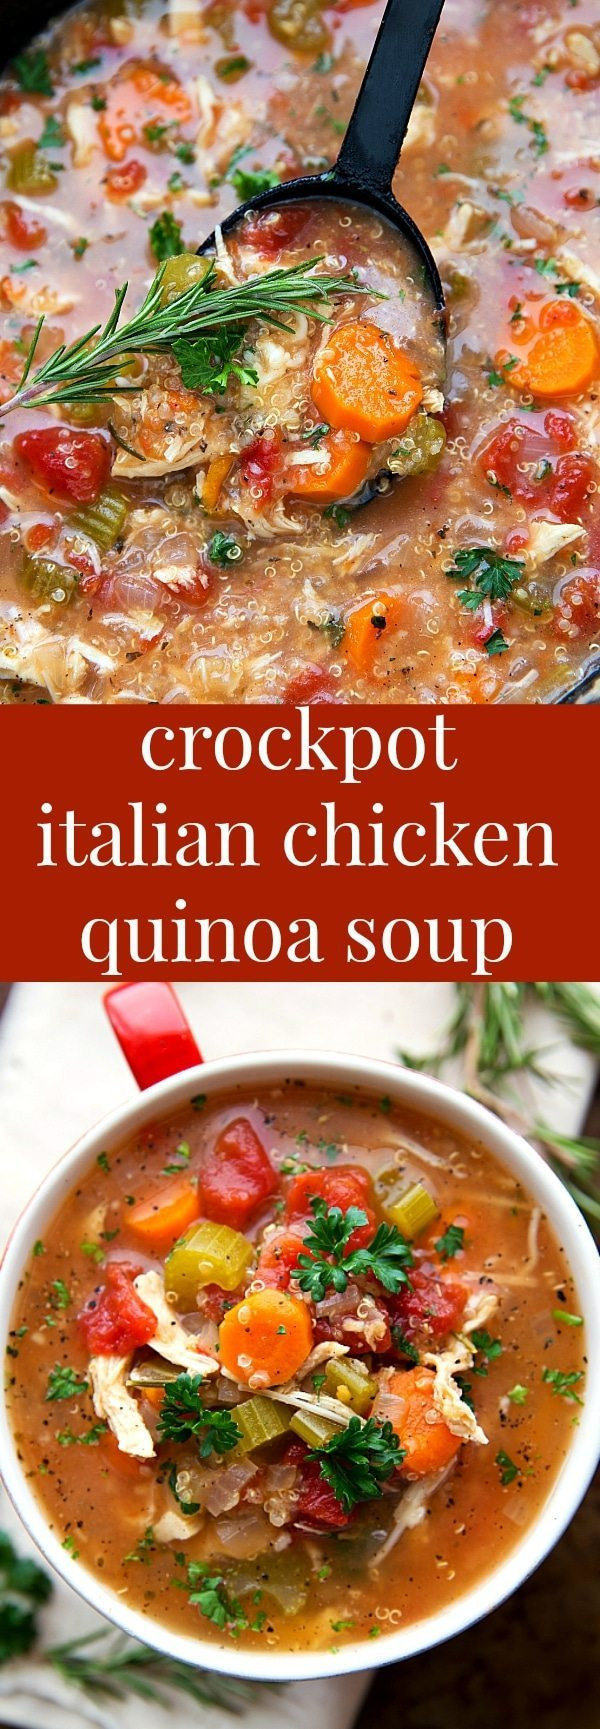 Crockpot Chicken And Vegetable Soup
 Crockpot Italian Chicken Quinoa and Ve able Soup